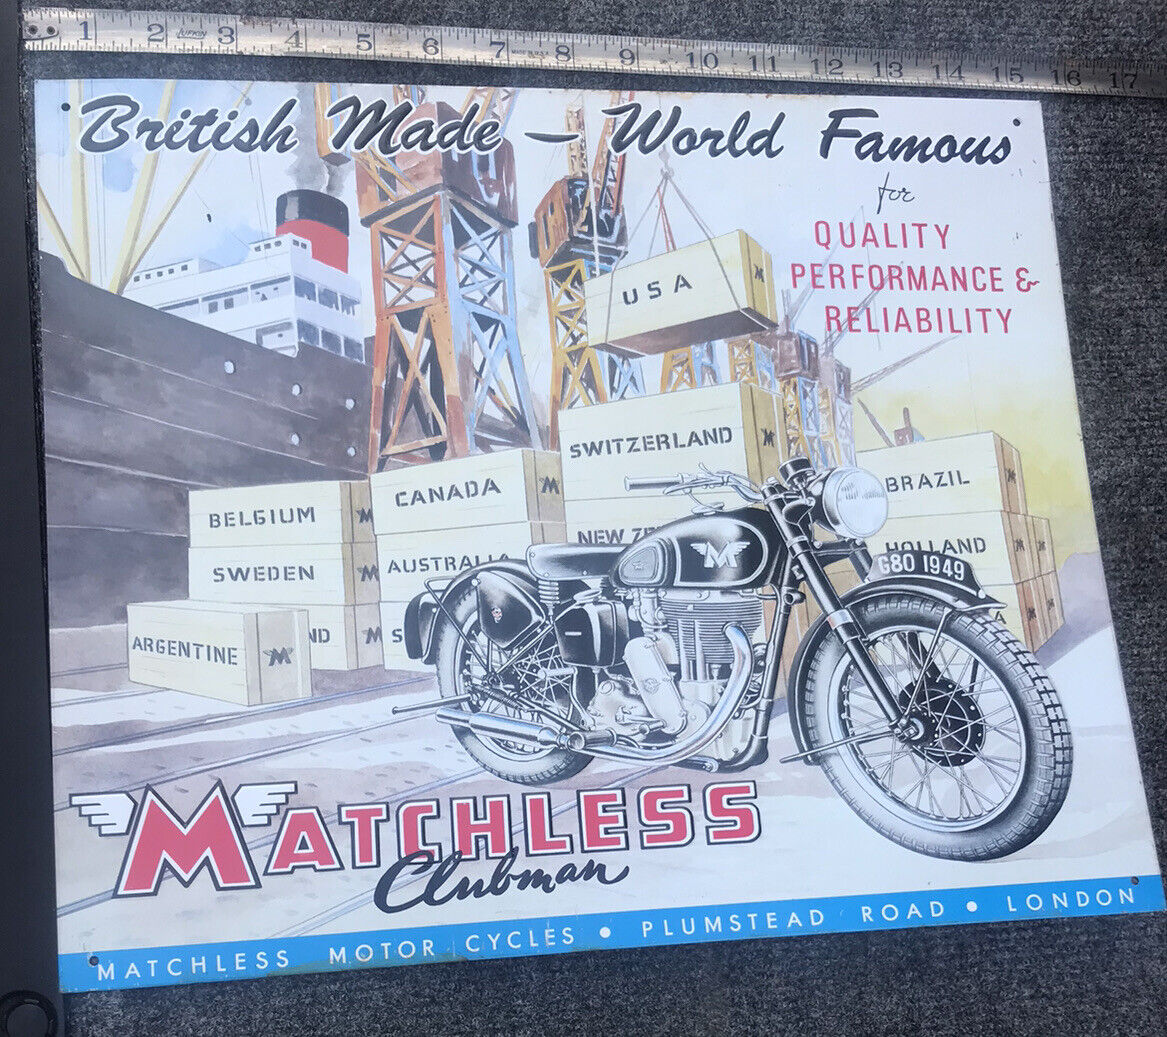 Metal Sign, Matchless Clubman Motorcycles “British Made-World Famous” 